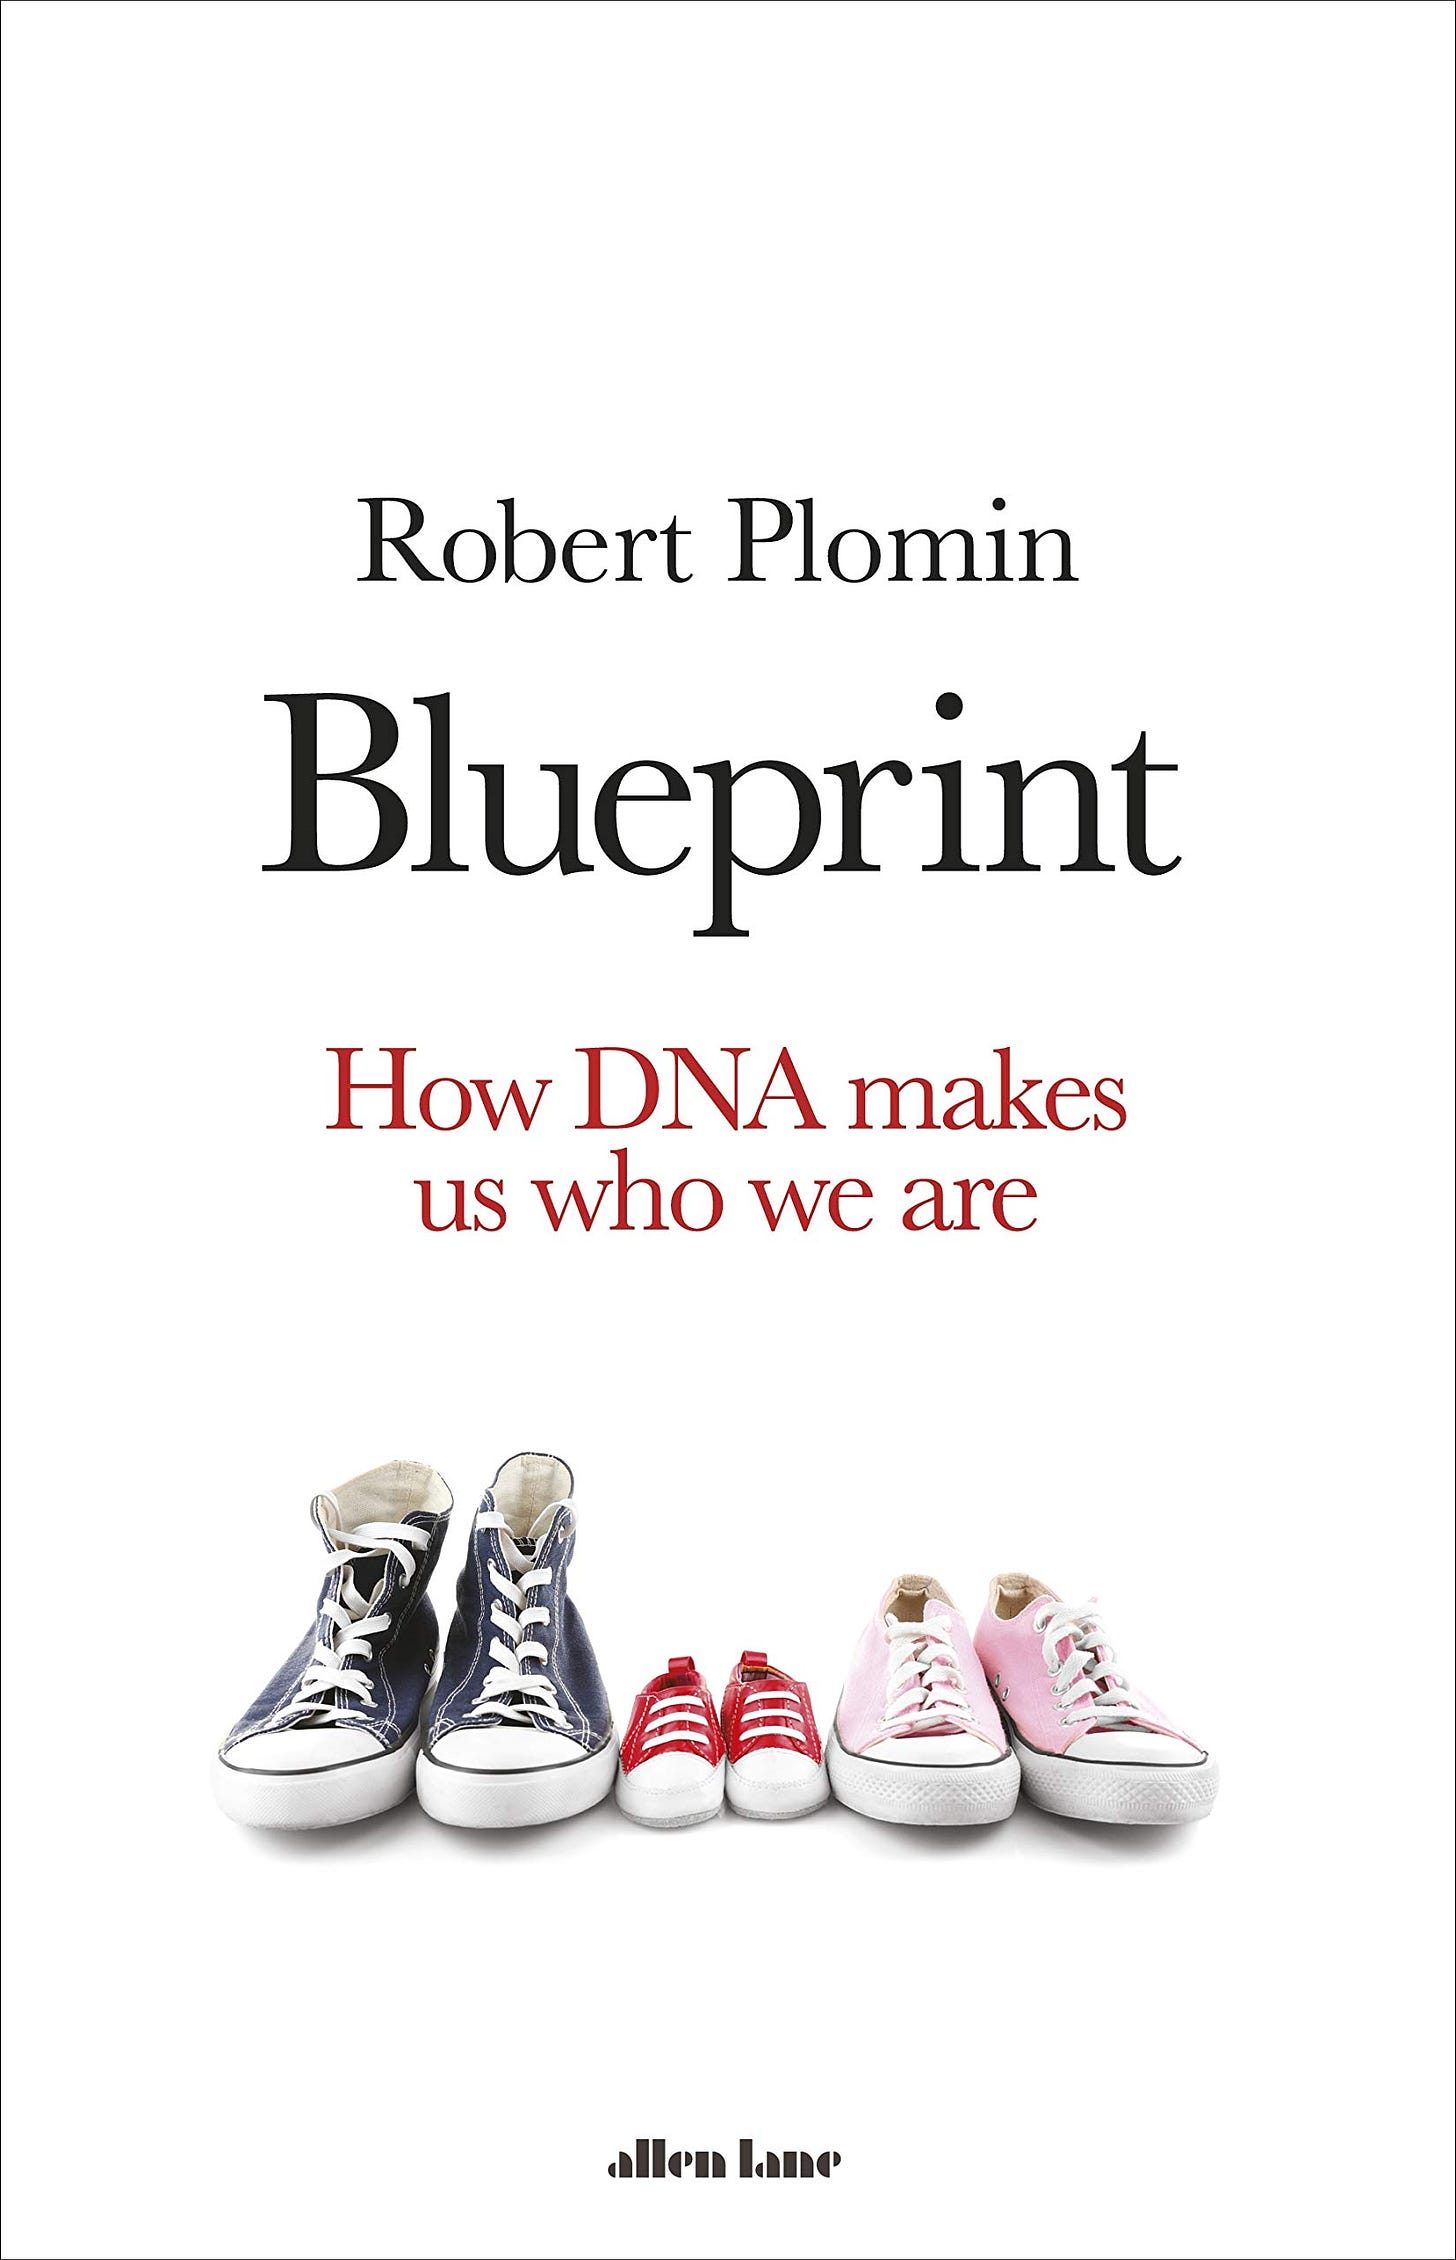 Blueprint: How DNA Makes Us Who We Are: Amazon.co.uk: Plomin, Robert:  9780241282076: Books